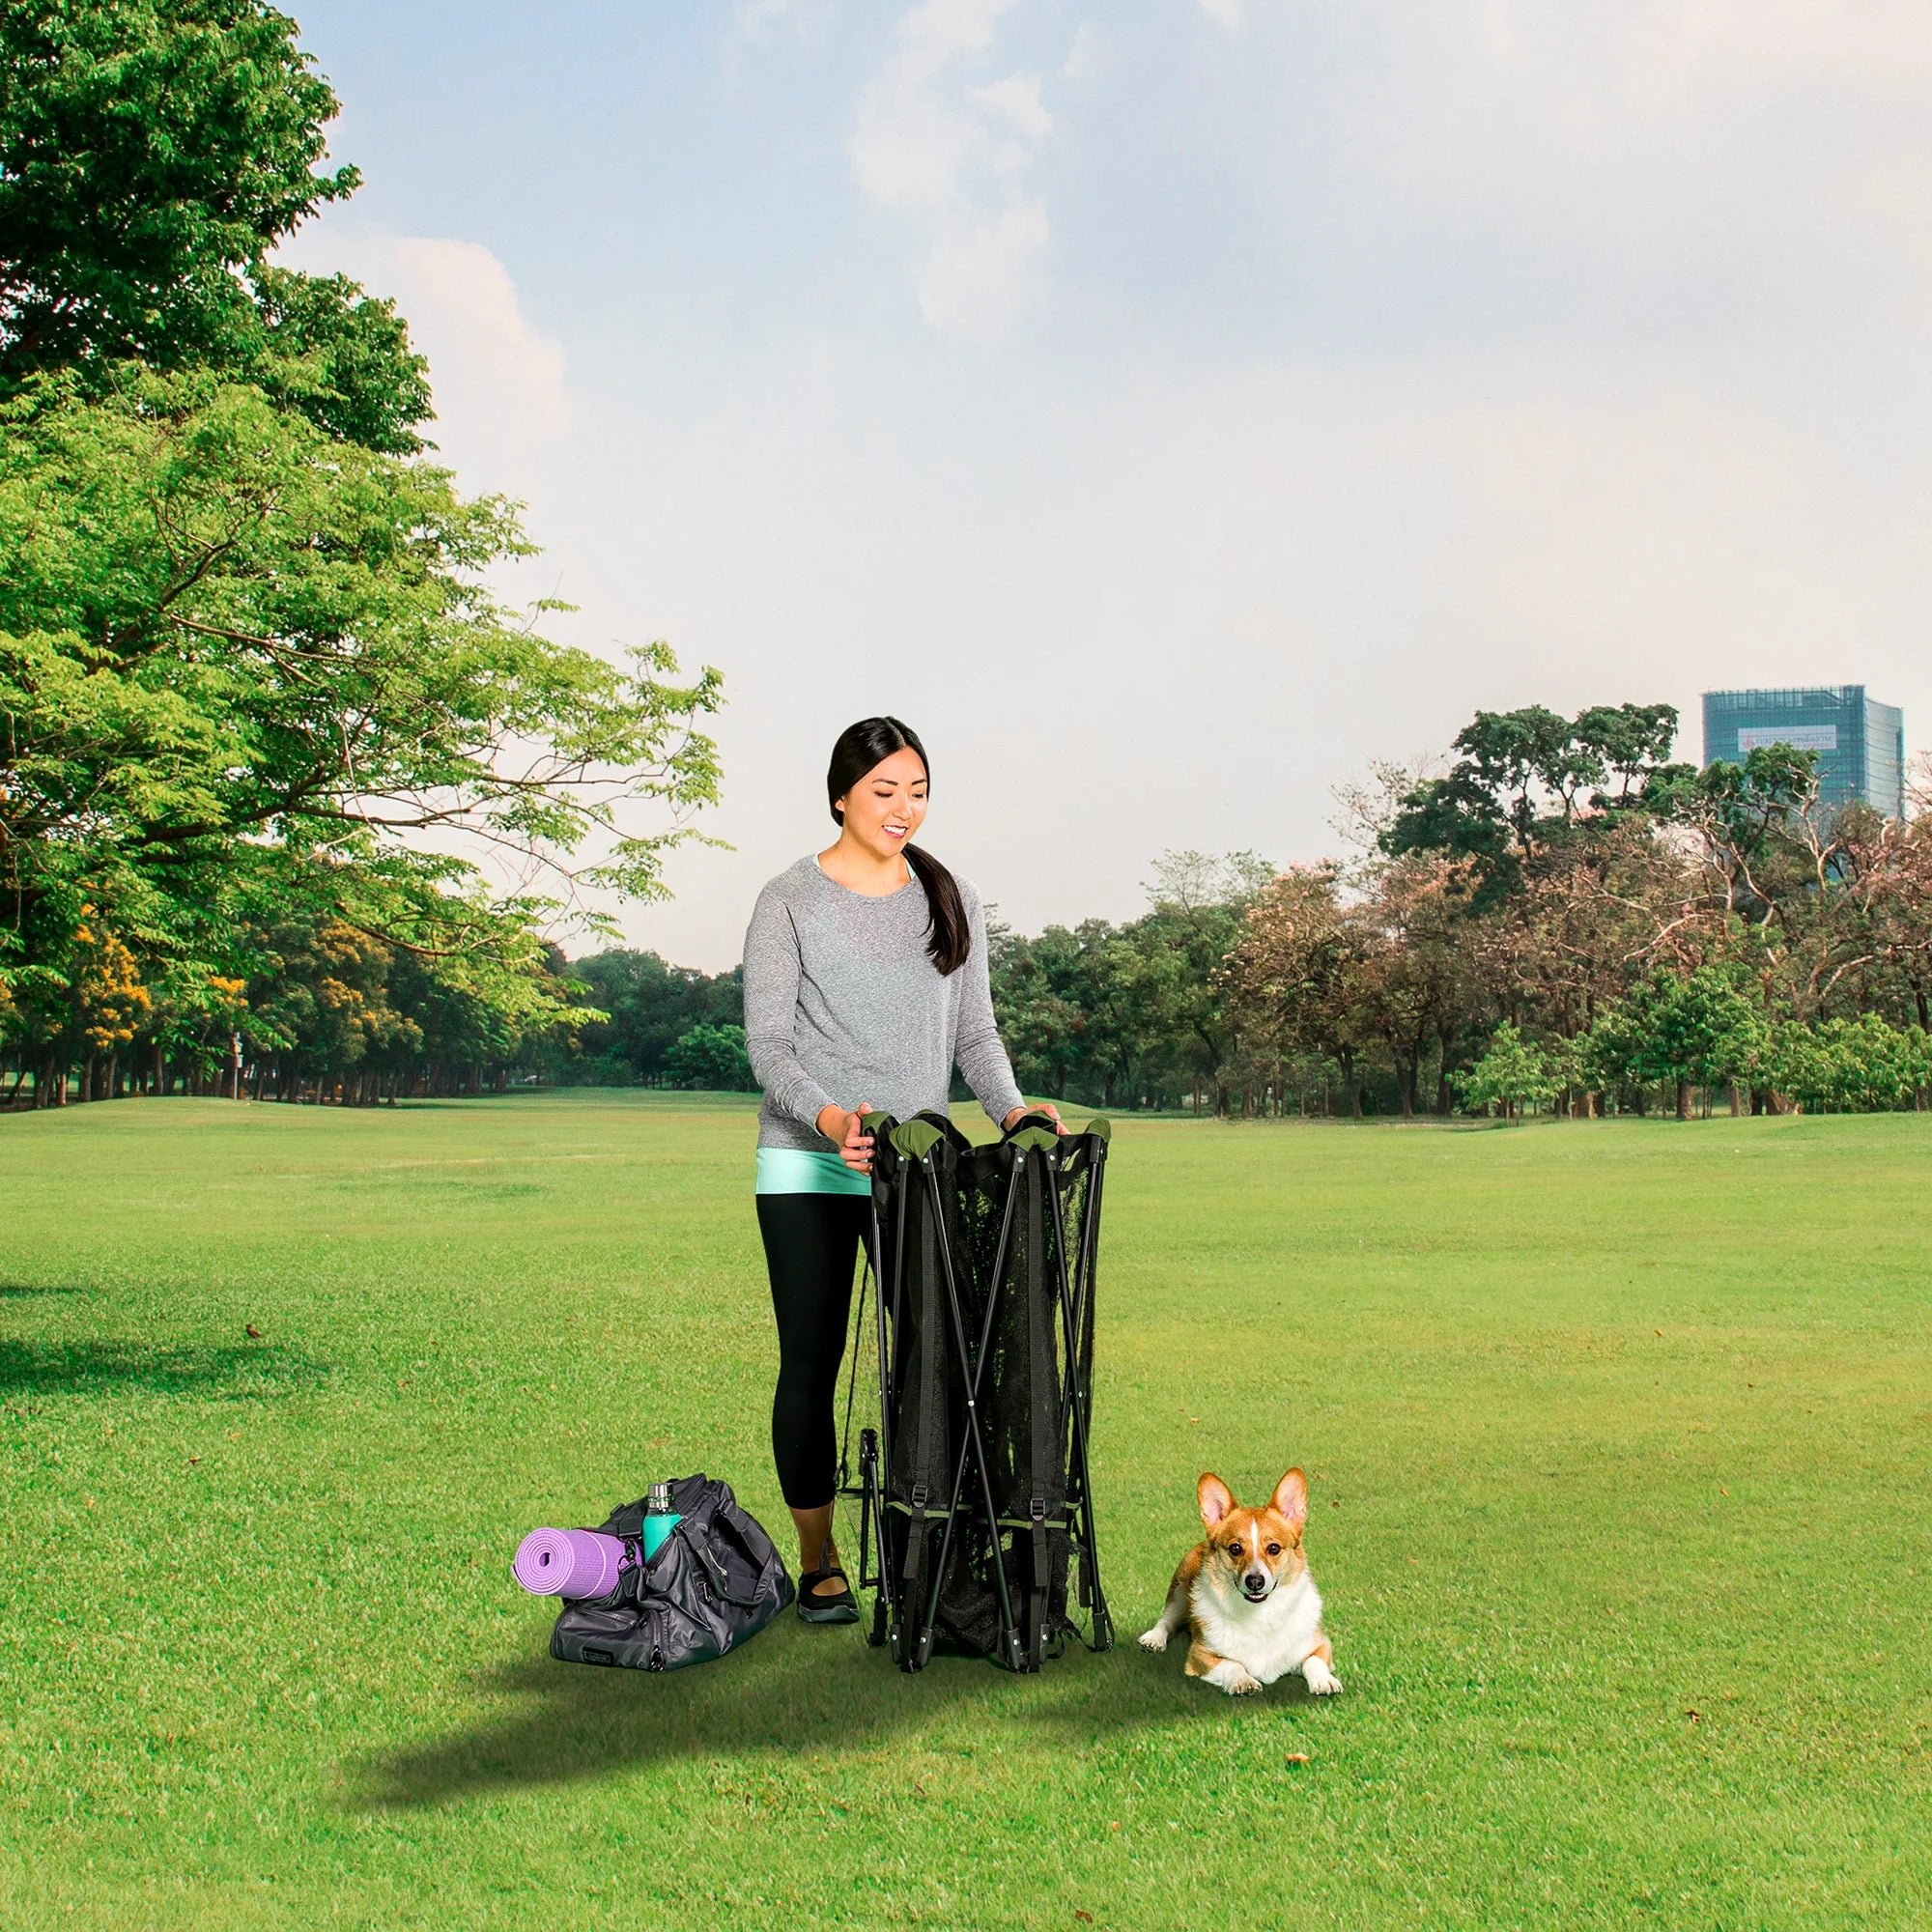 Woman folding Portable Pet Pen on green grass next to her dog in a park.